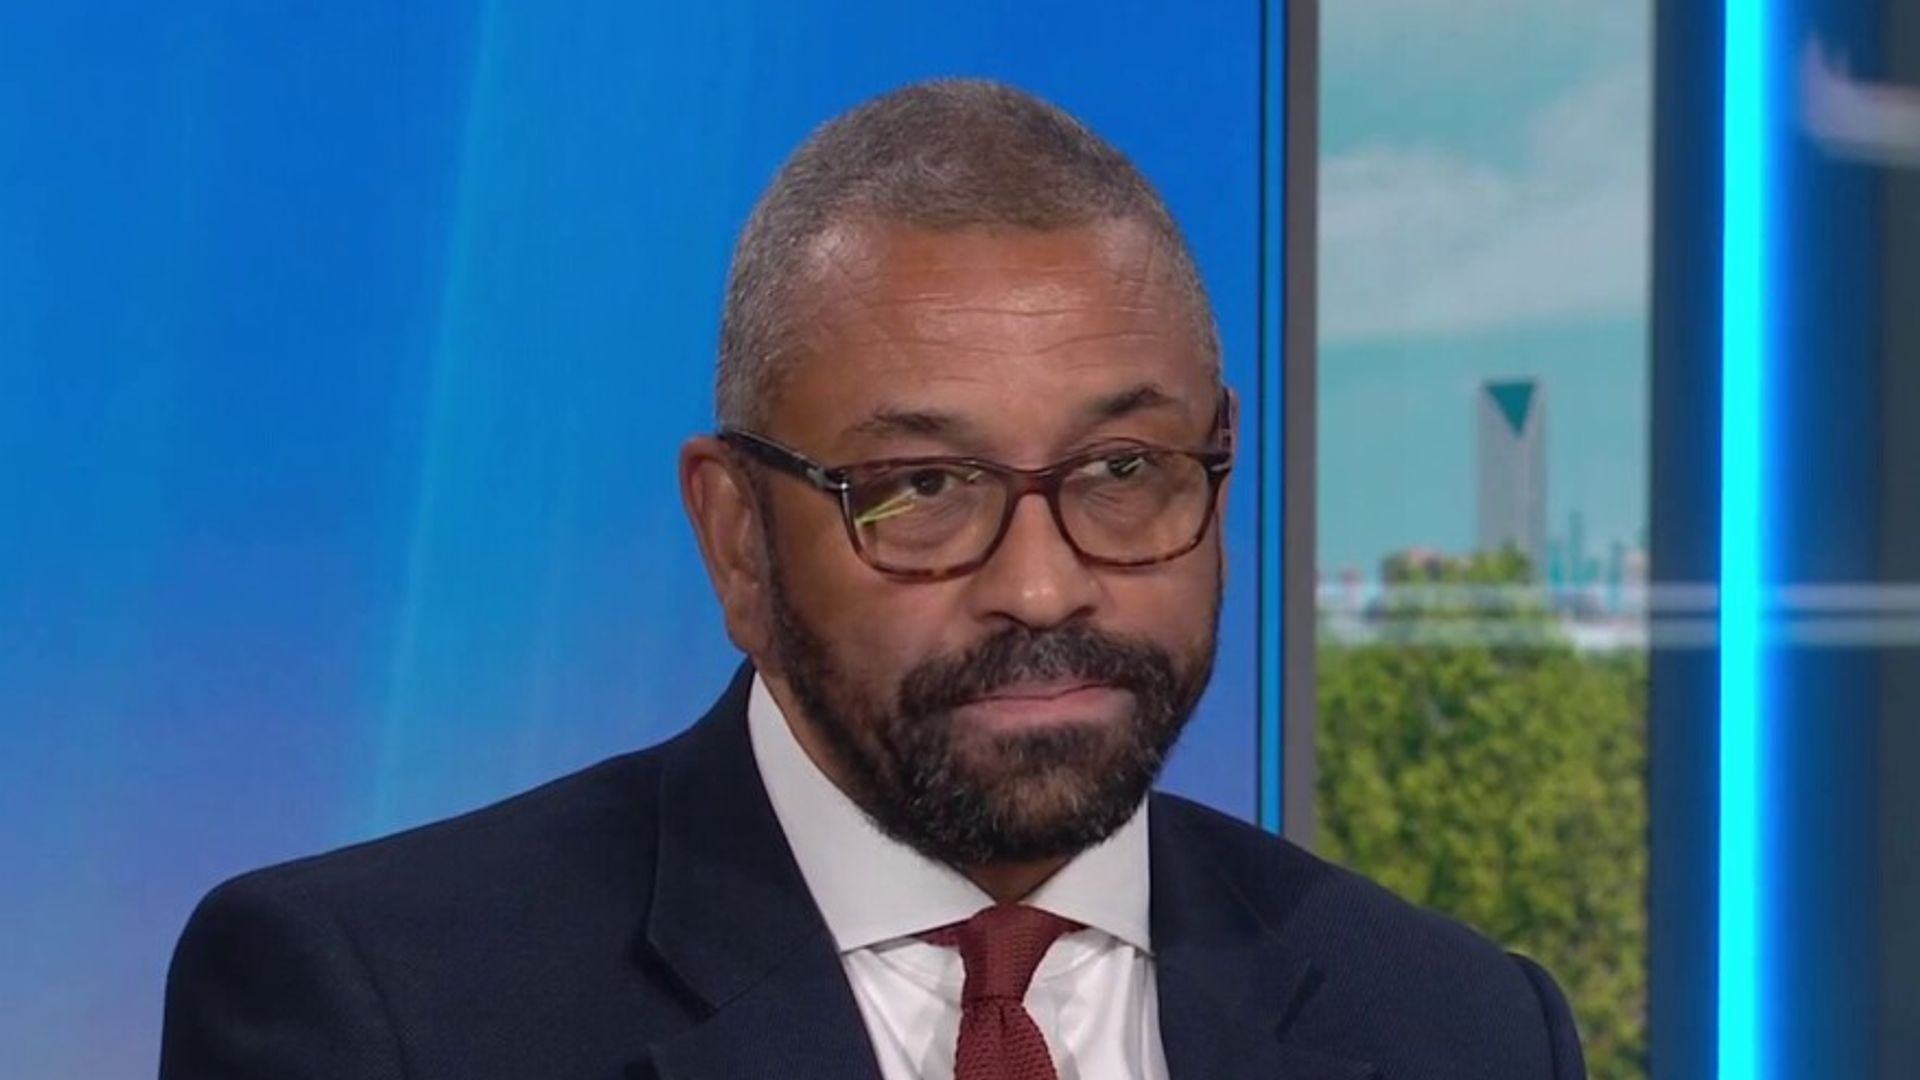 James Cleverly says 'reasonable chance' he will run to be Tory leader